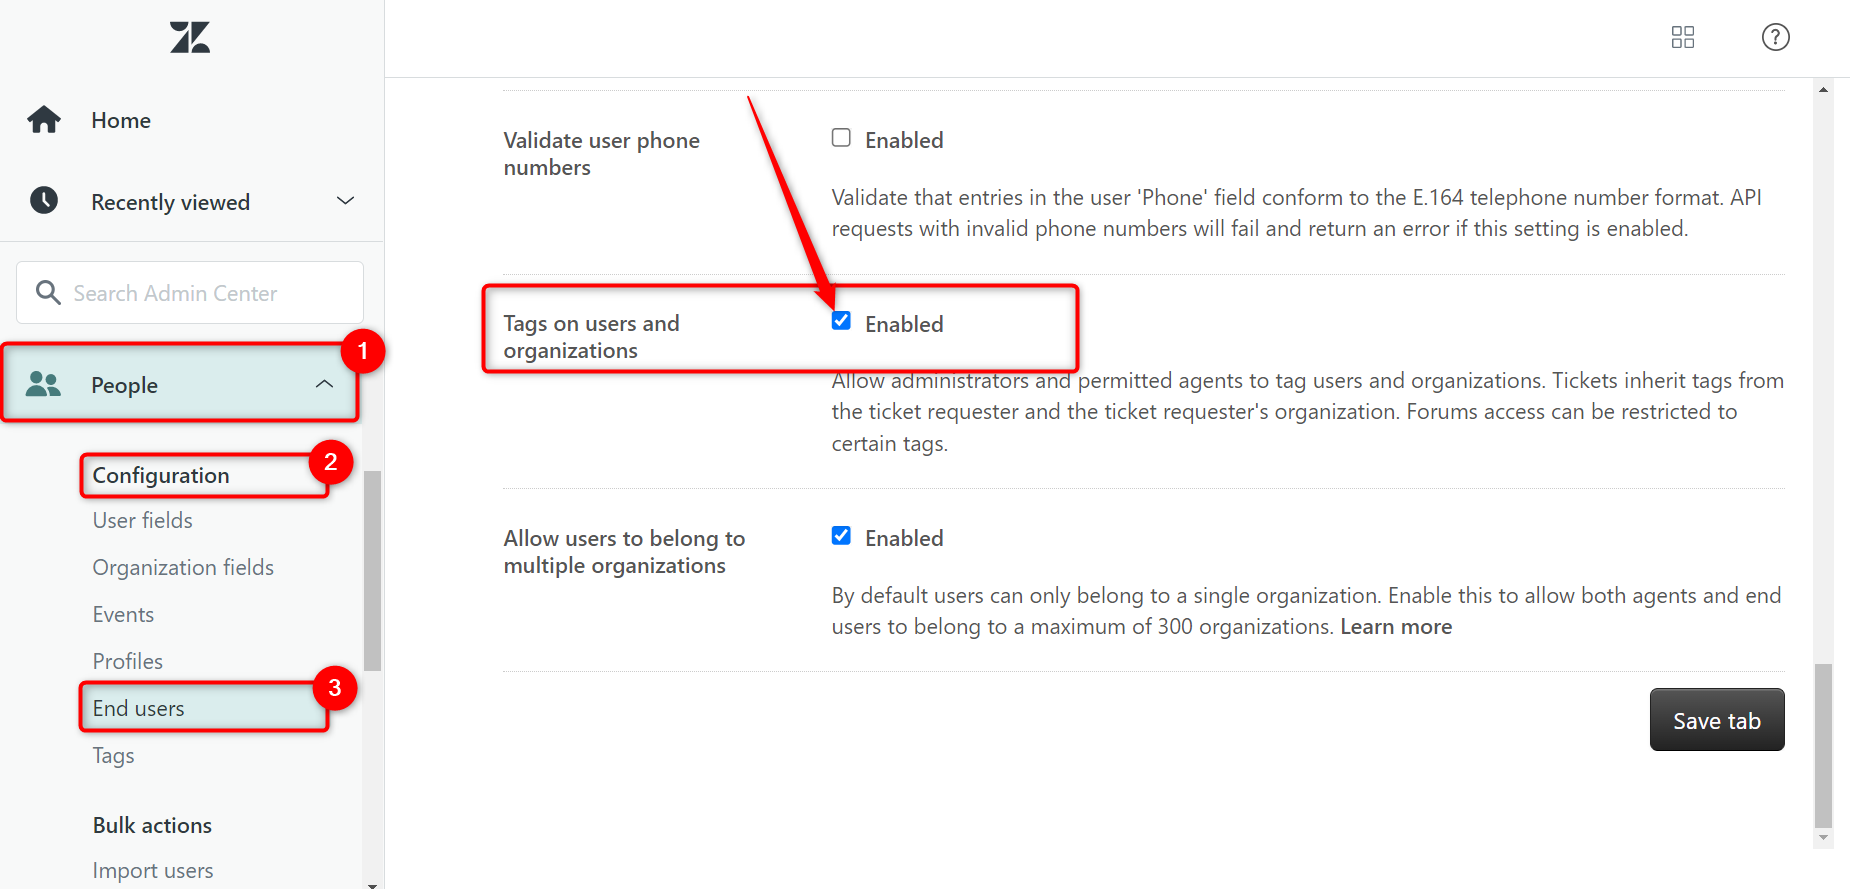 Enable Tags On Users in the Admin Center